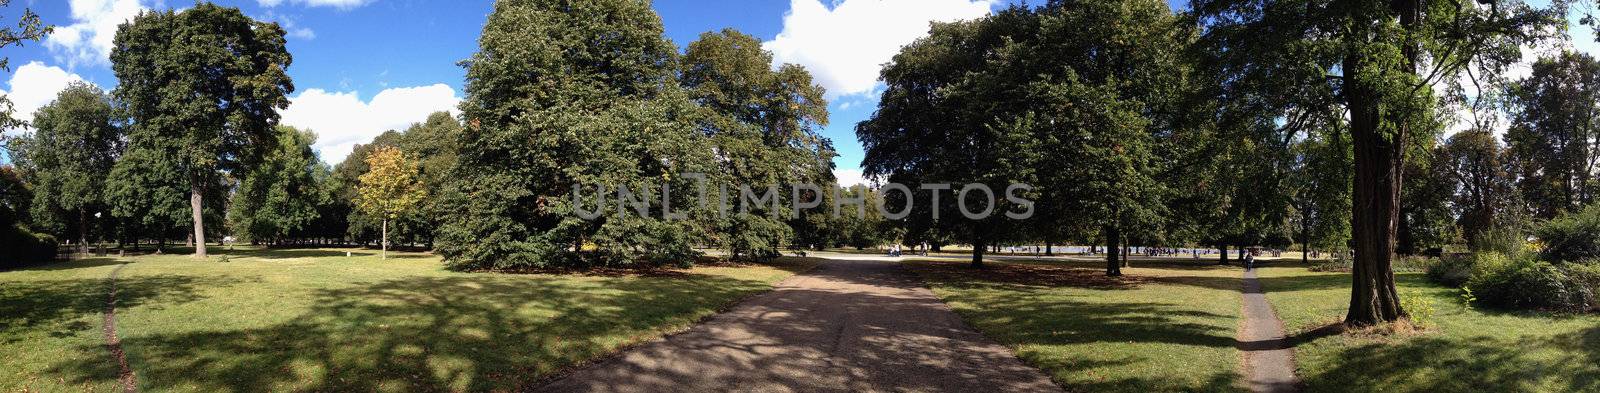 Hyde Park panoramic view in London by jovannig